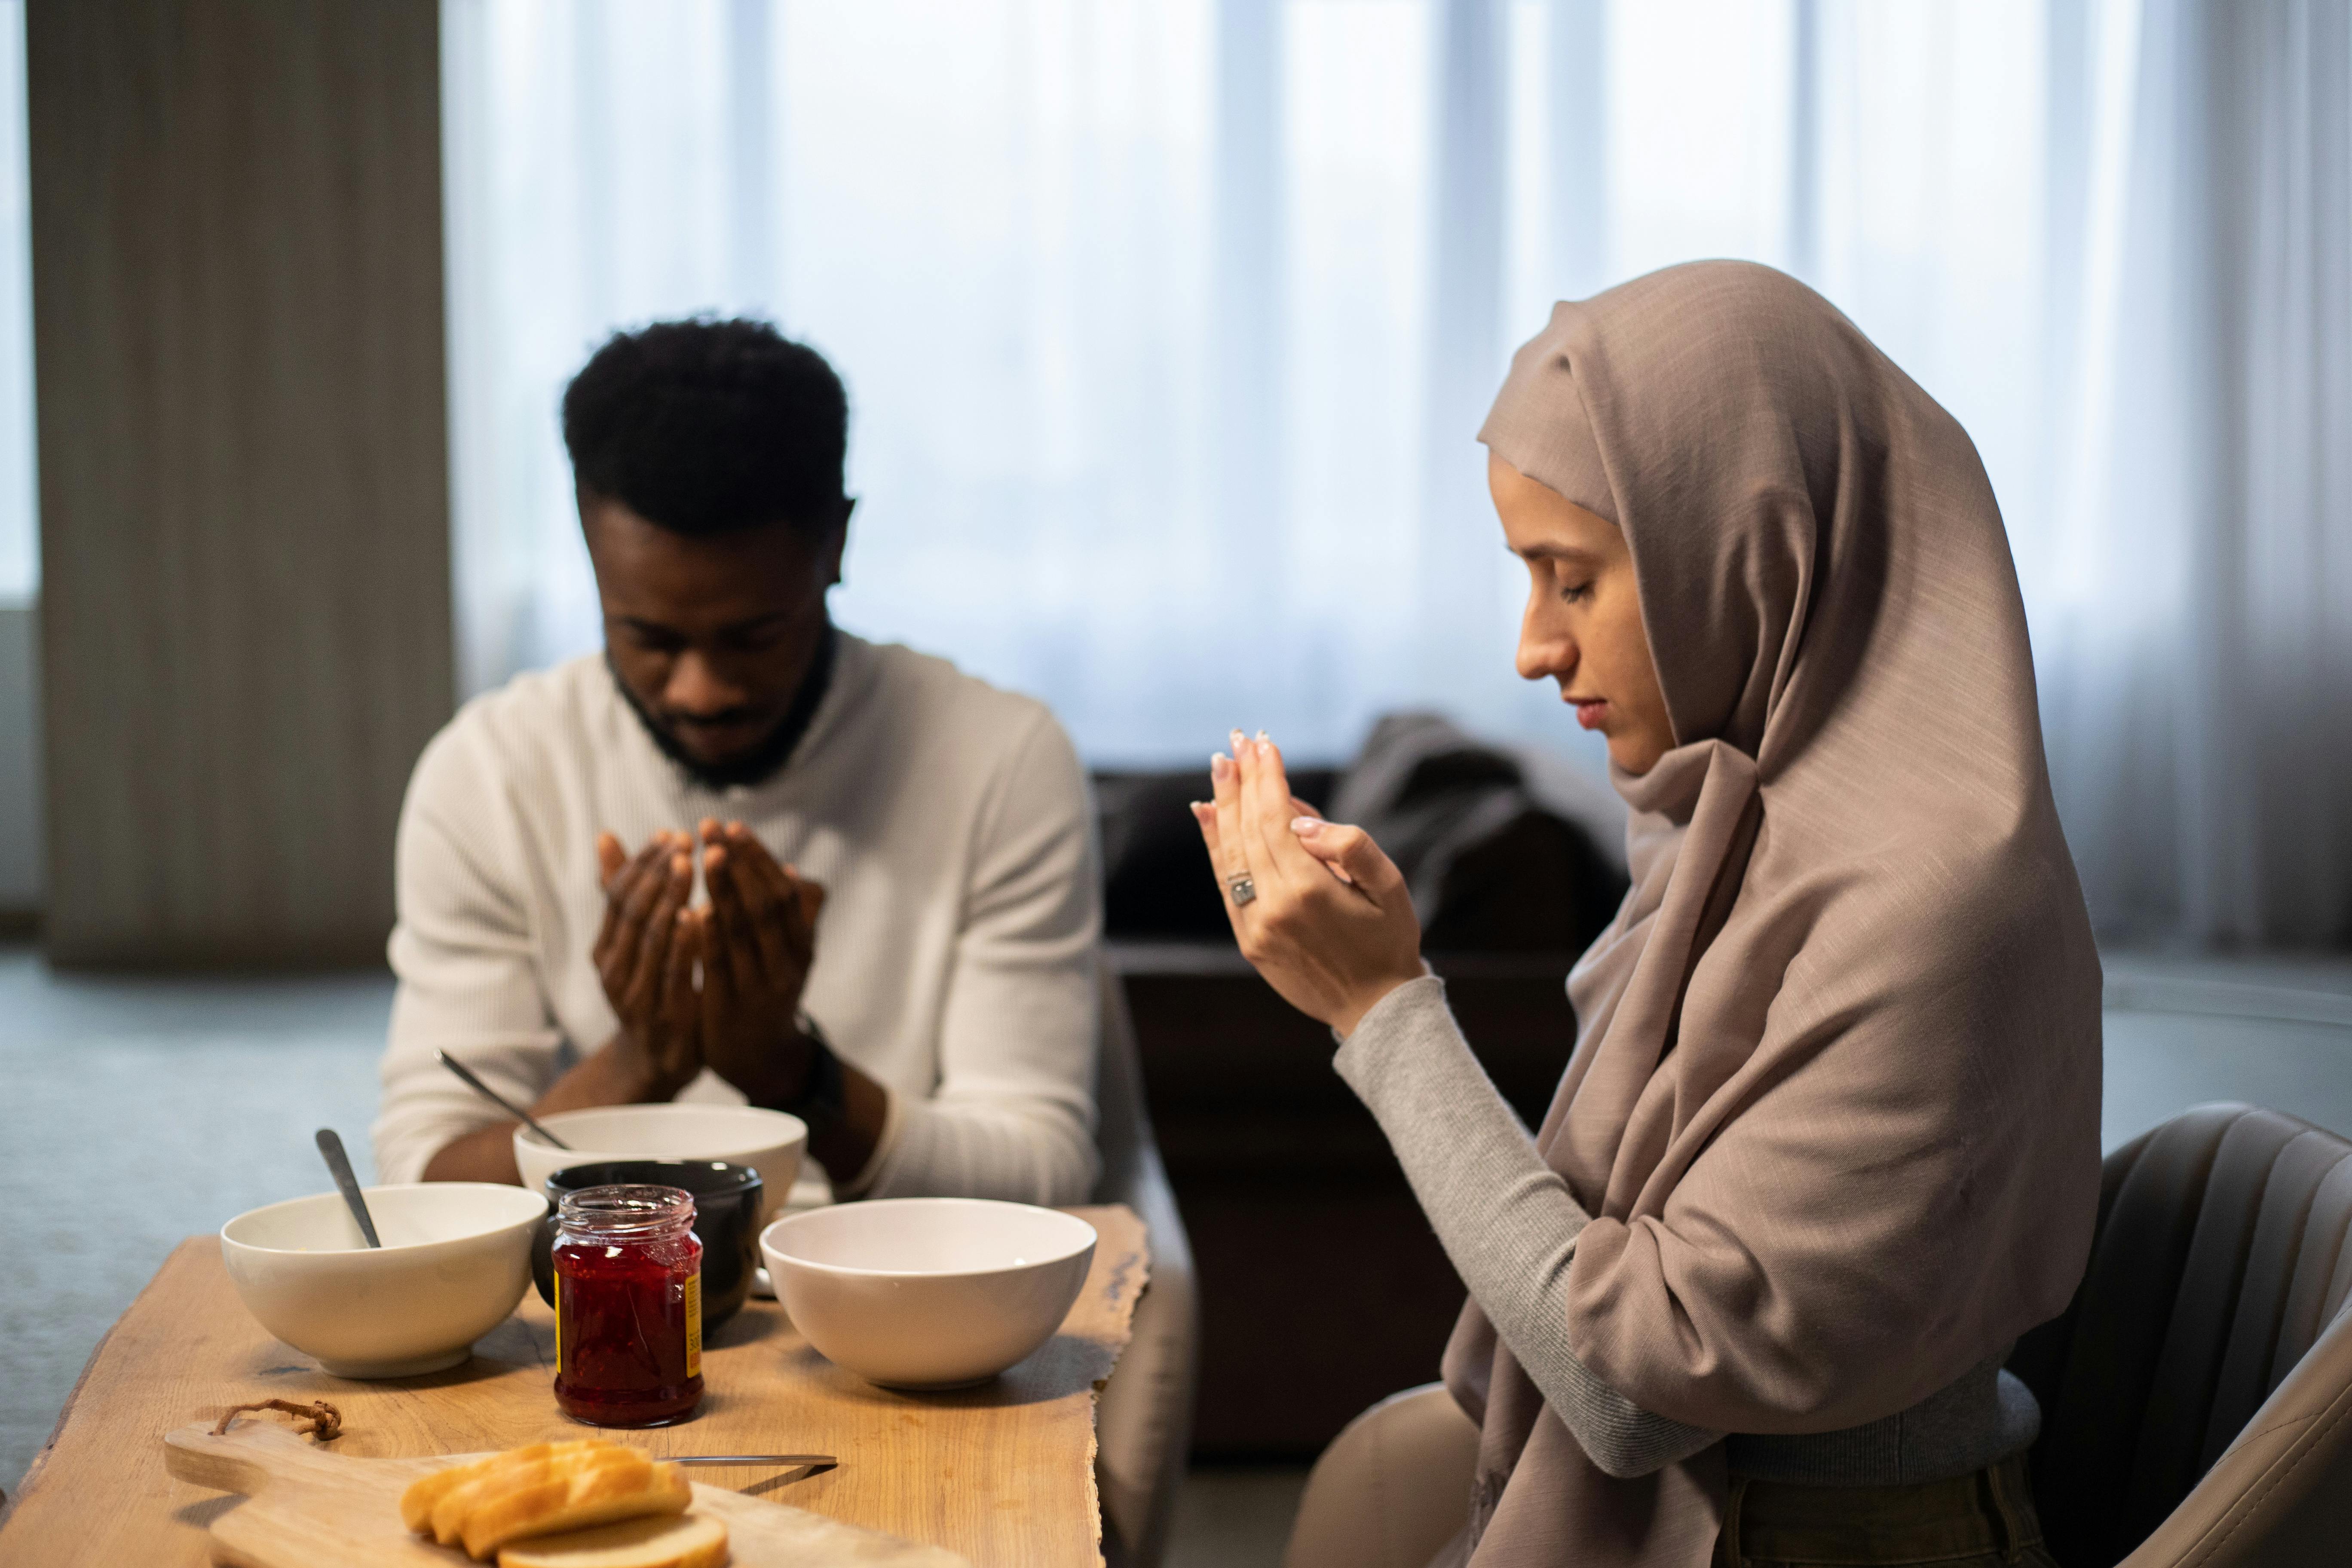 multiethnic couple praying at table before eating